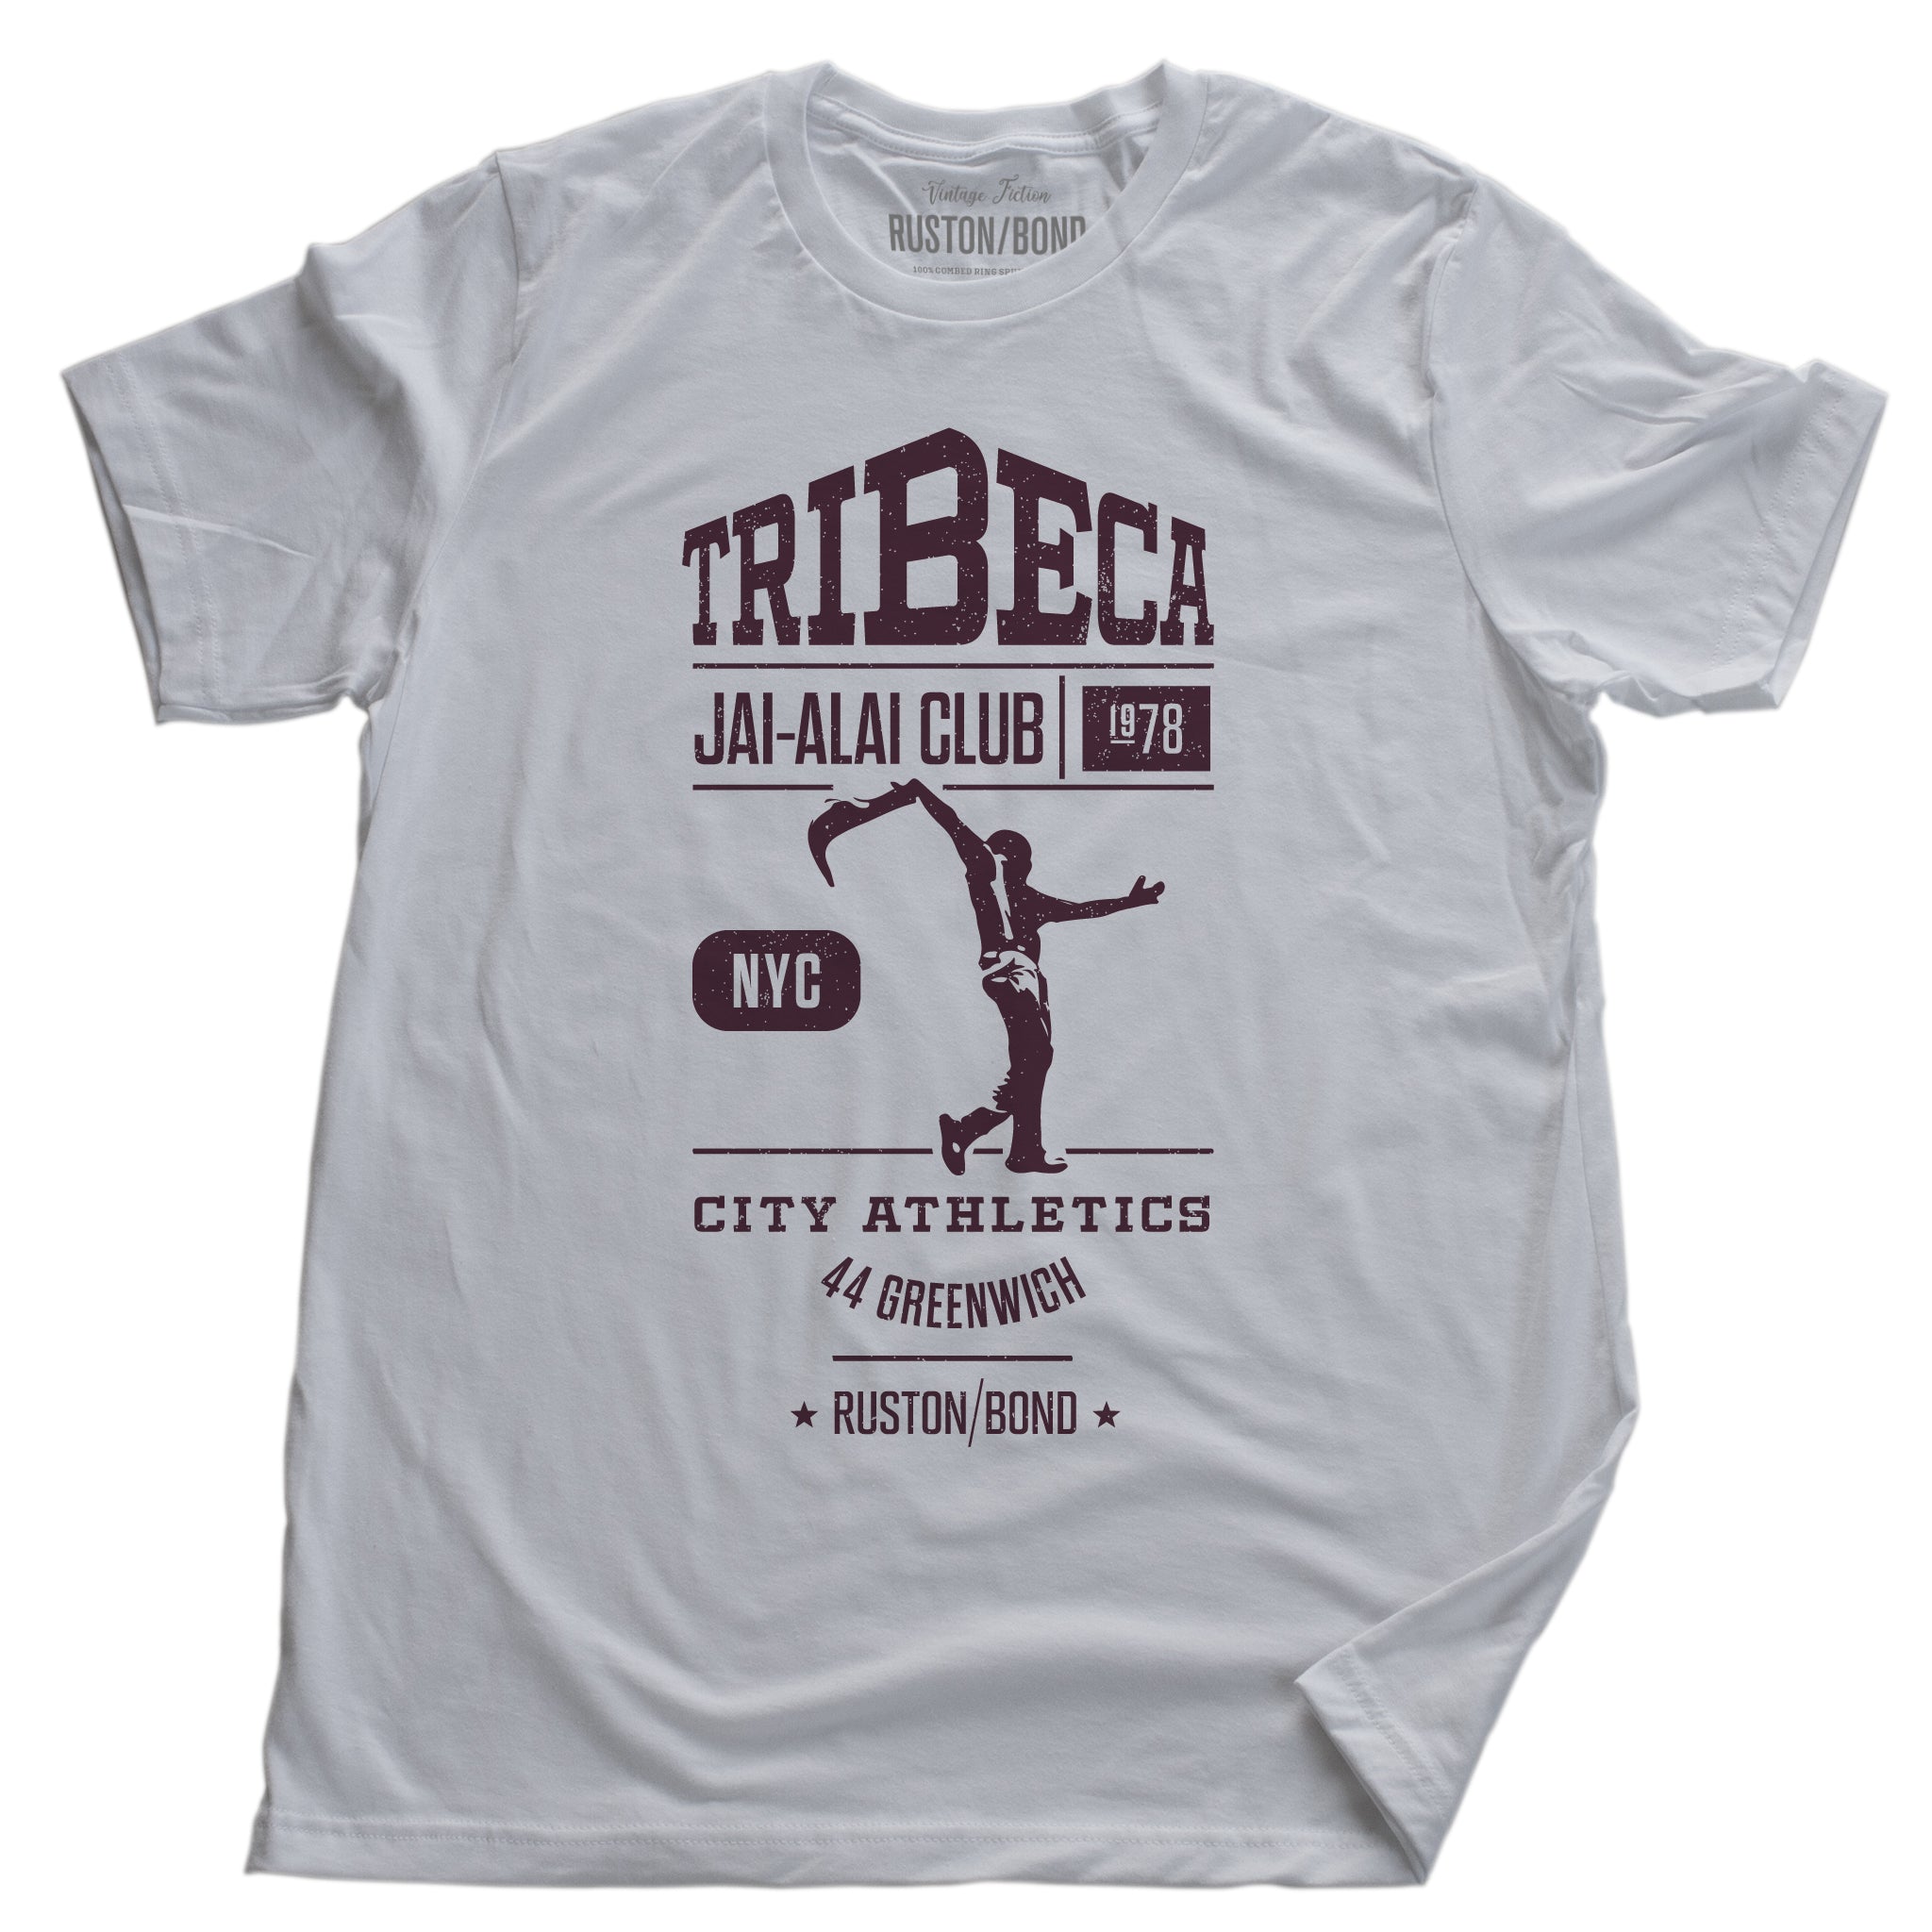 A classic, vintage-inspired, retro graphic t-shirt for an imaginary sports club in TriBeCa, New York City—“TriBeCa Jai-Alai Club, city athletics, 1978.” By fashion brand RUSTON/BOND, from wolfsaint.net